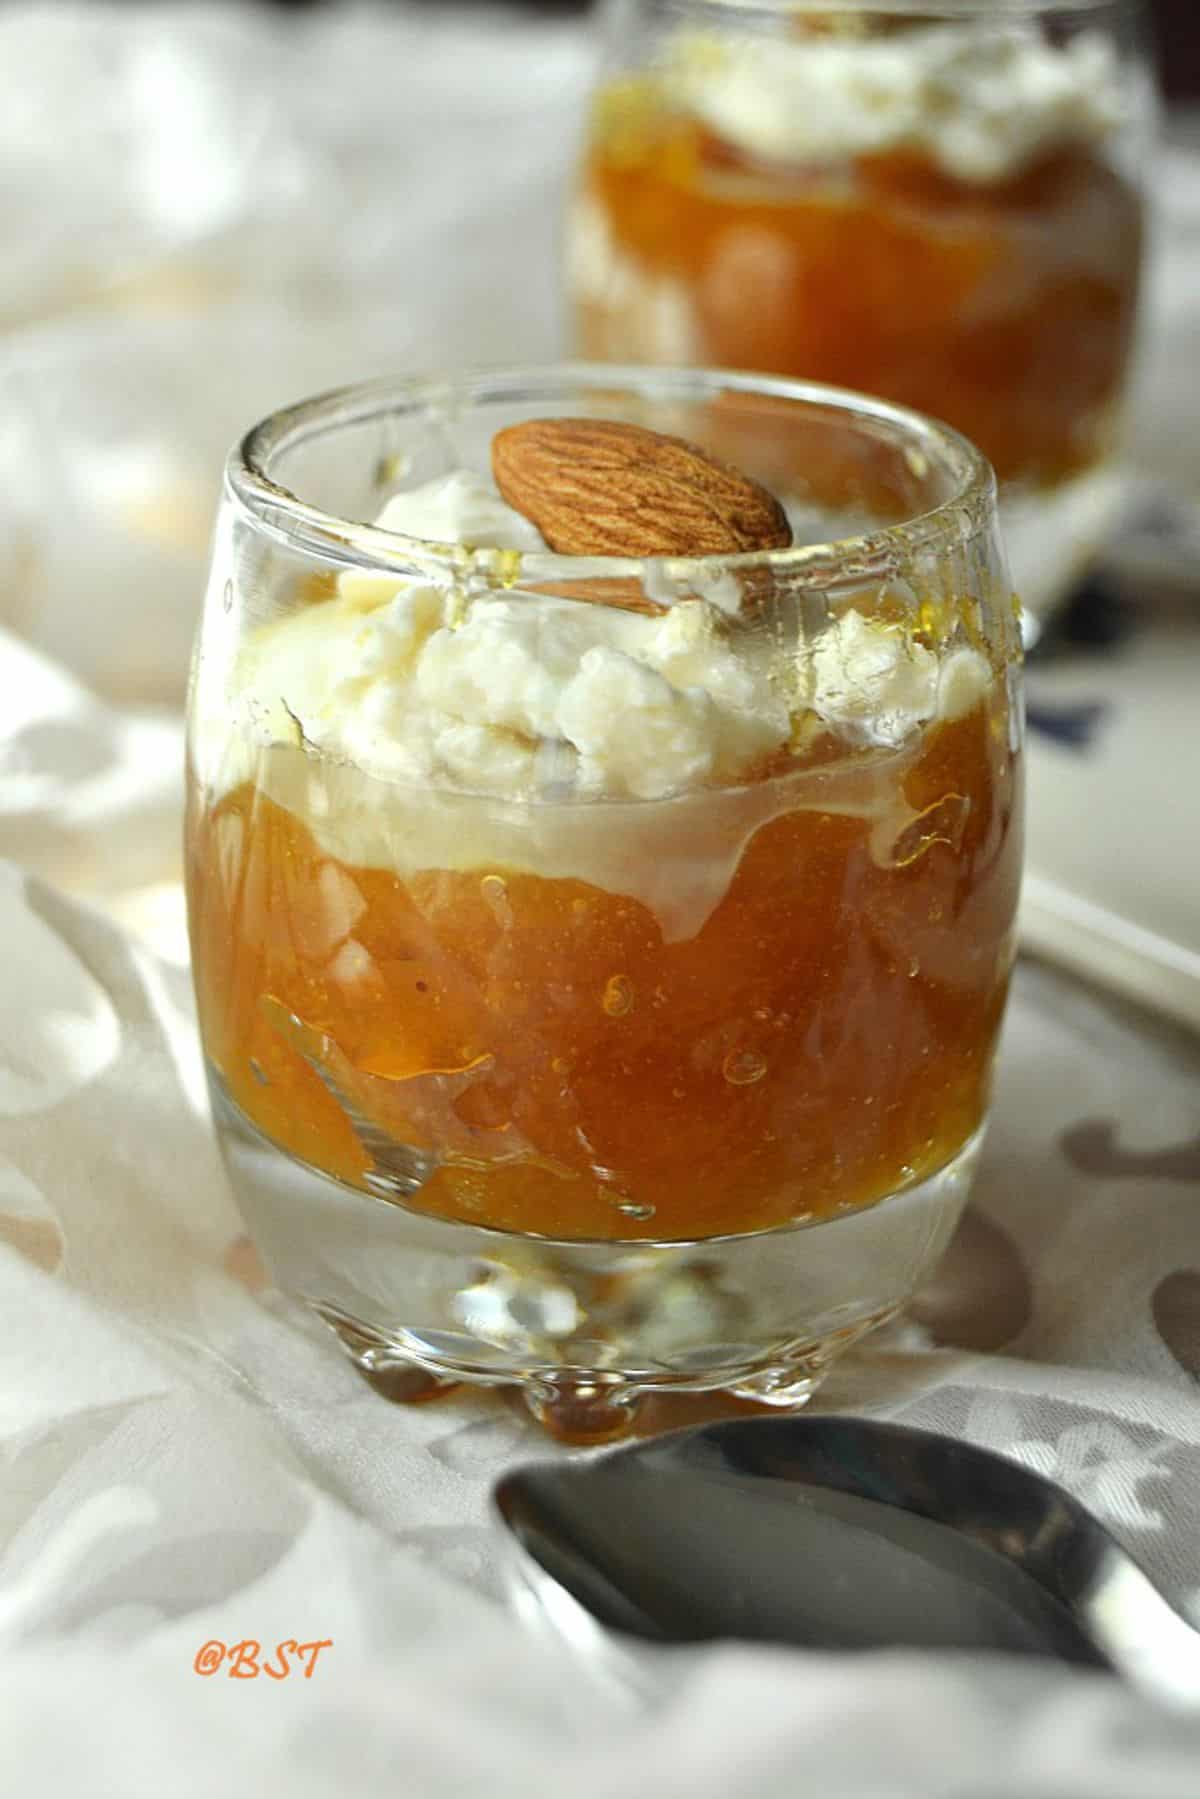 dessert cup filled with dried apricot pudding with cream.